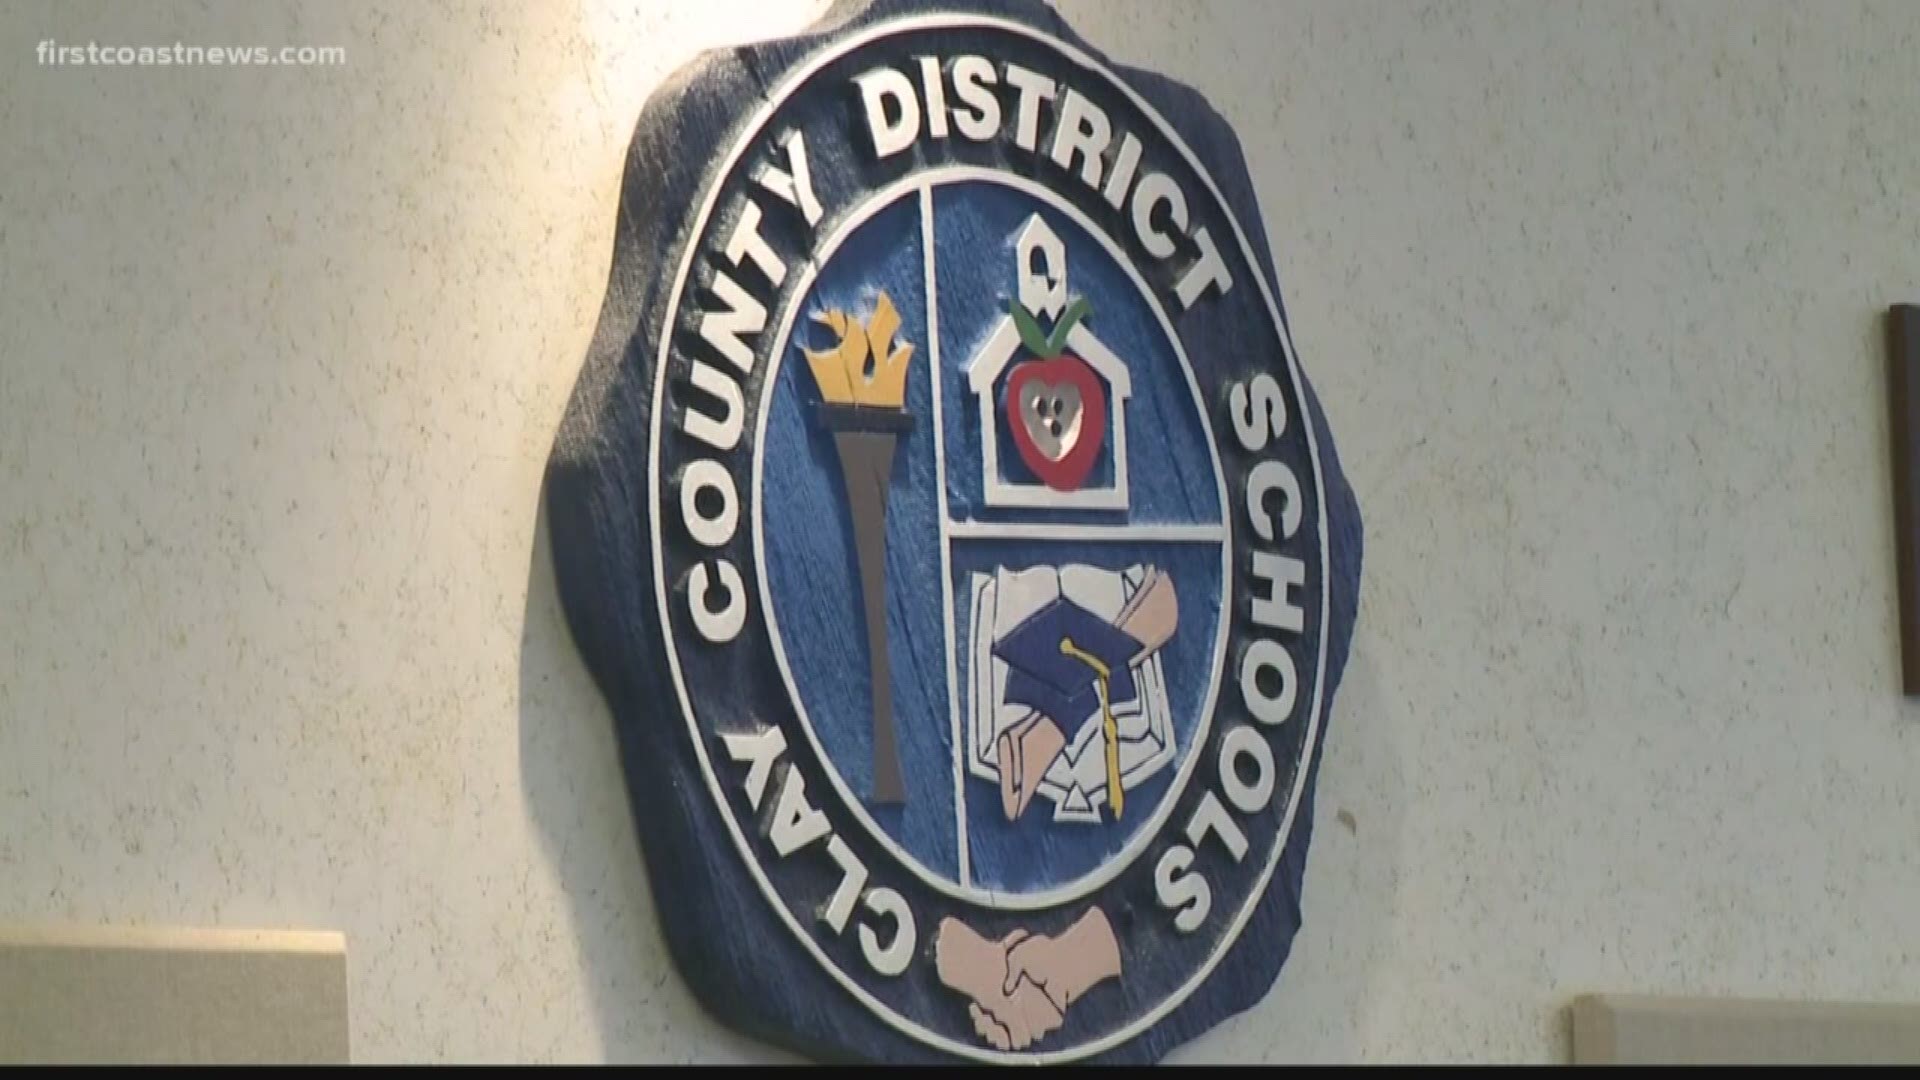 The school board voted in February to part ways with Clay County sheriff deputies in favor of hiring their own officers.